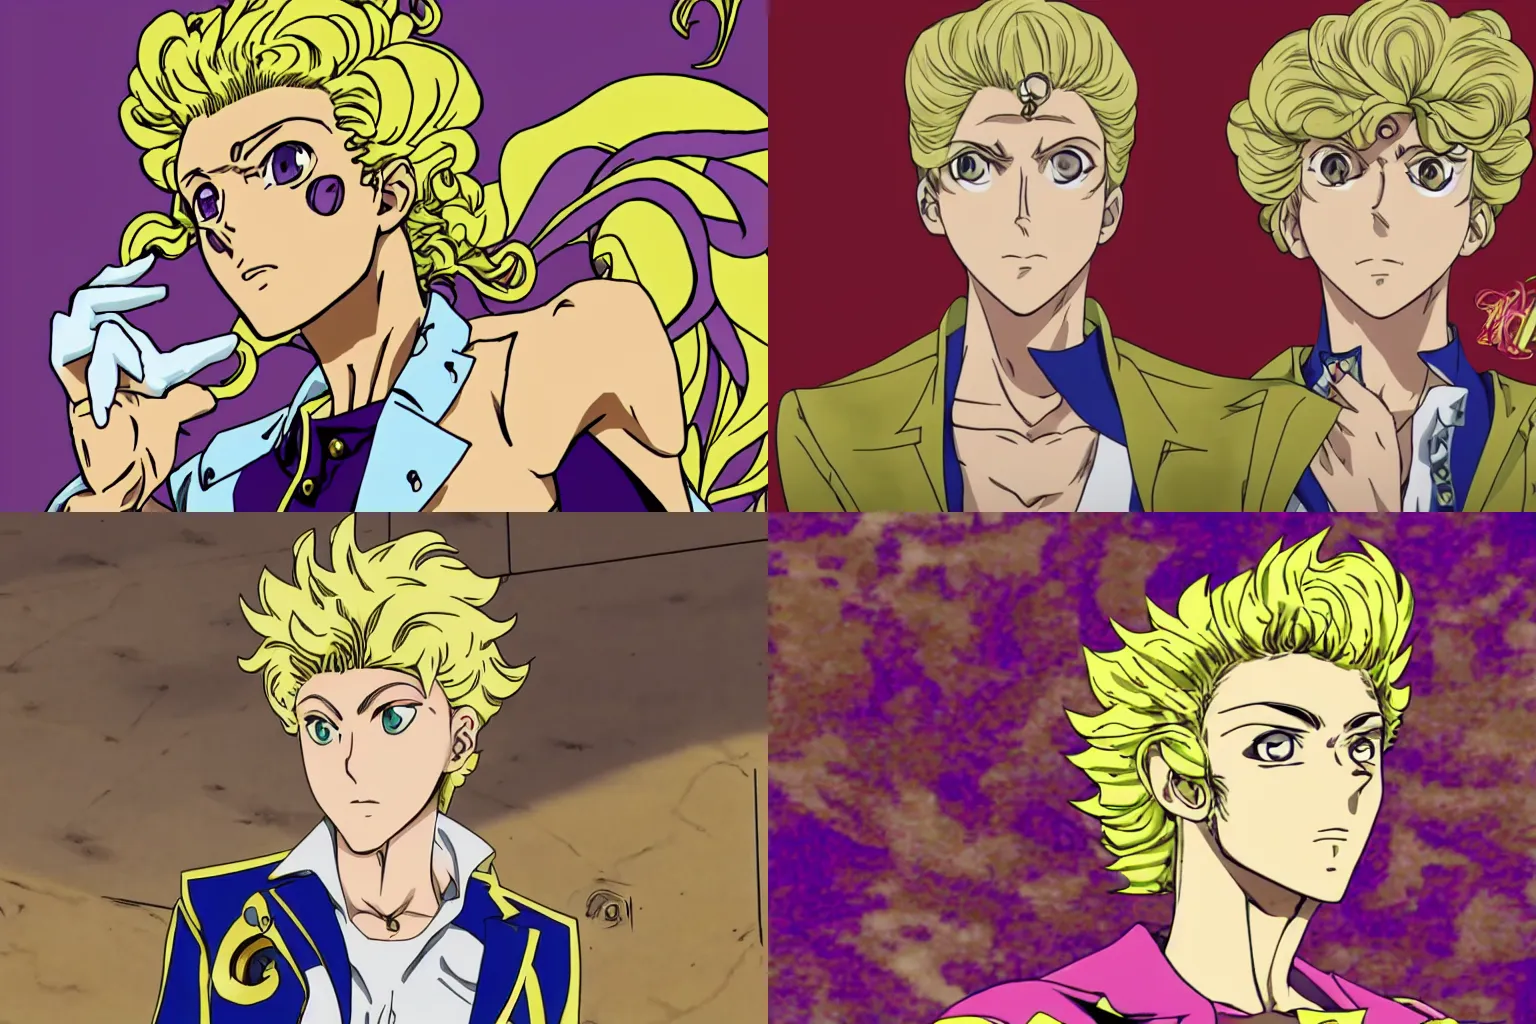 Prompt: Giorno Giovanna, screenshot from Jojo's Bizarre Adventure: Stardust Crusaders, David productions 2012 anime, high quality, clean lineart,